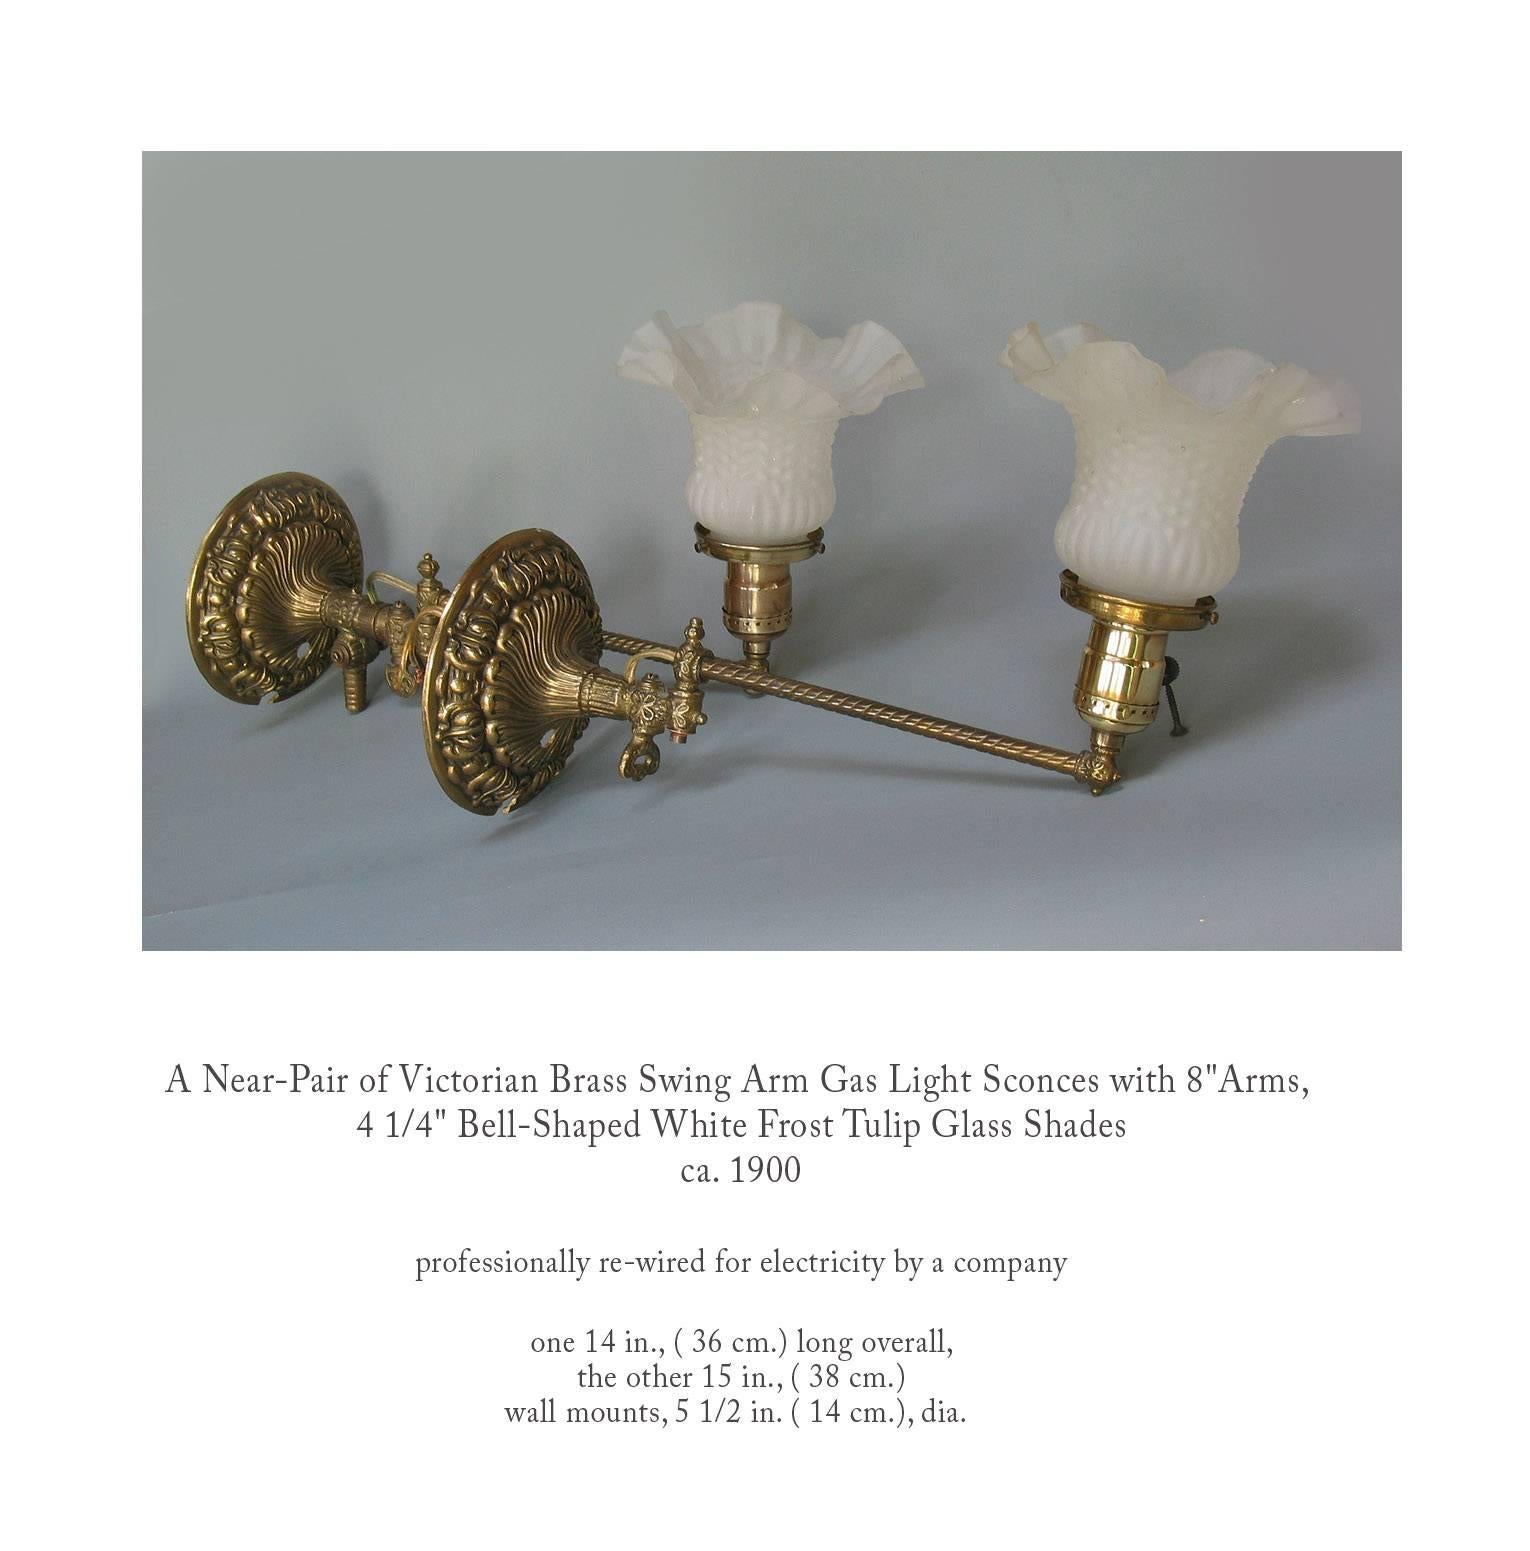 A near-pair of Victorian brass swing arm gas light sconces with 8"-inch arms, 4 1/4 " bell-shaped white frost tulip glass shades, circa 1900. Professionally re-wired for electricity by a company. One 14", (36 cm.) long overall, the